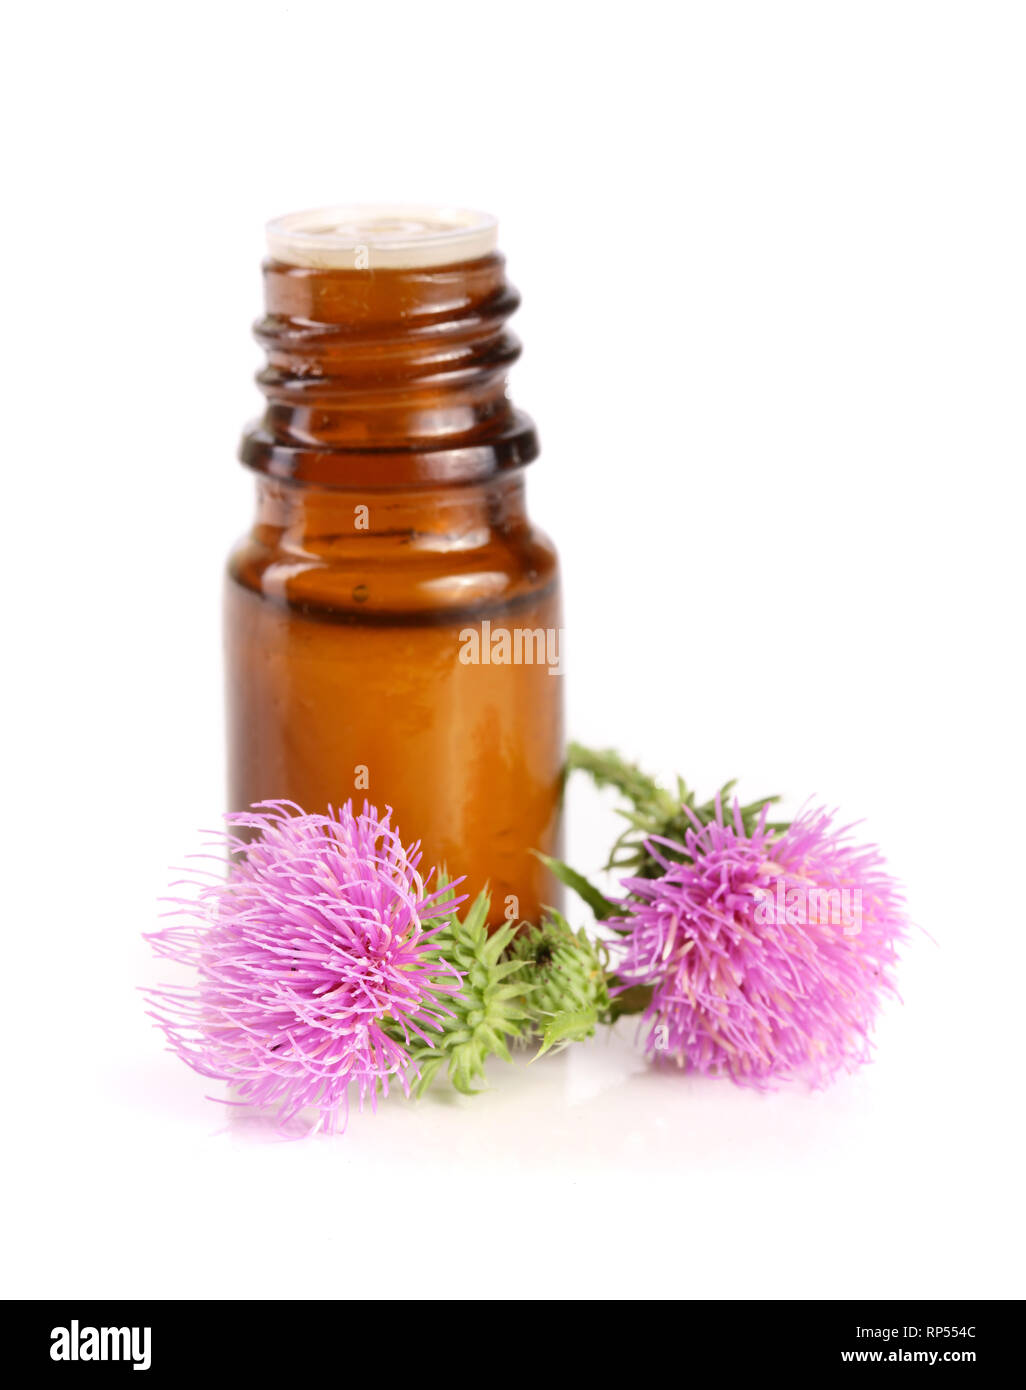 thistle oil and milk thistle flower isolated on white background. Stock Photo